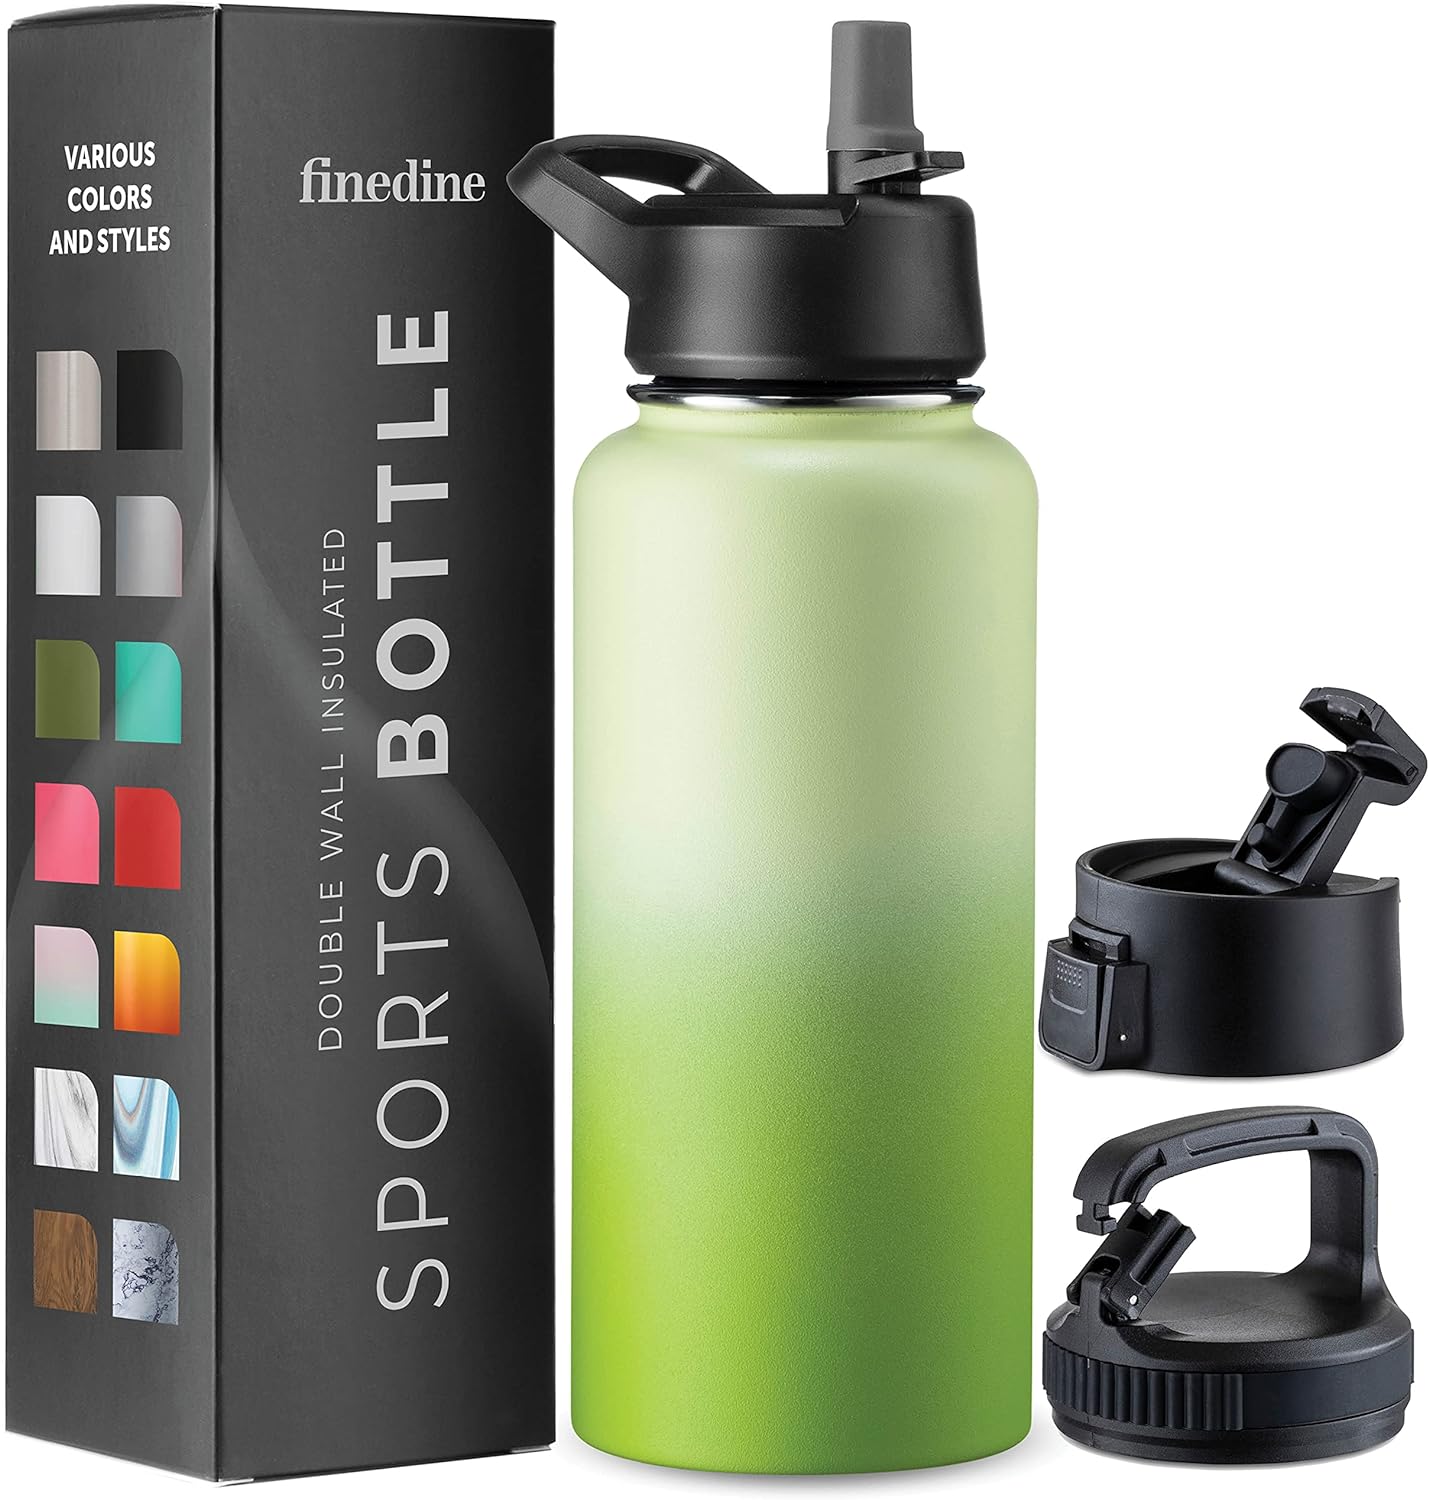 FineDine Insulated Water Bottles with Straw - 32 Oz Stainless Steel Metal Water Bottle W/ 3 Lids - Reusable for Travel, Camping, Bike, Sports - Dreamy Green